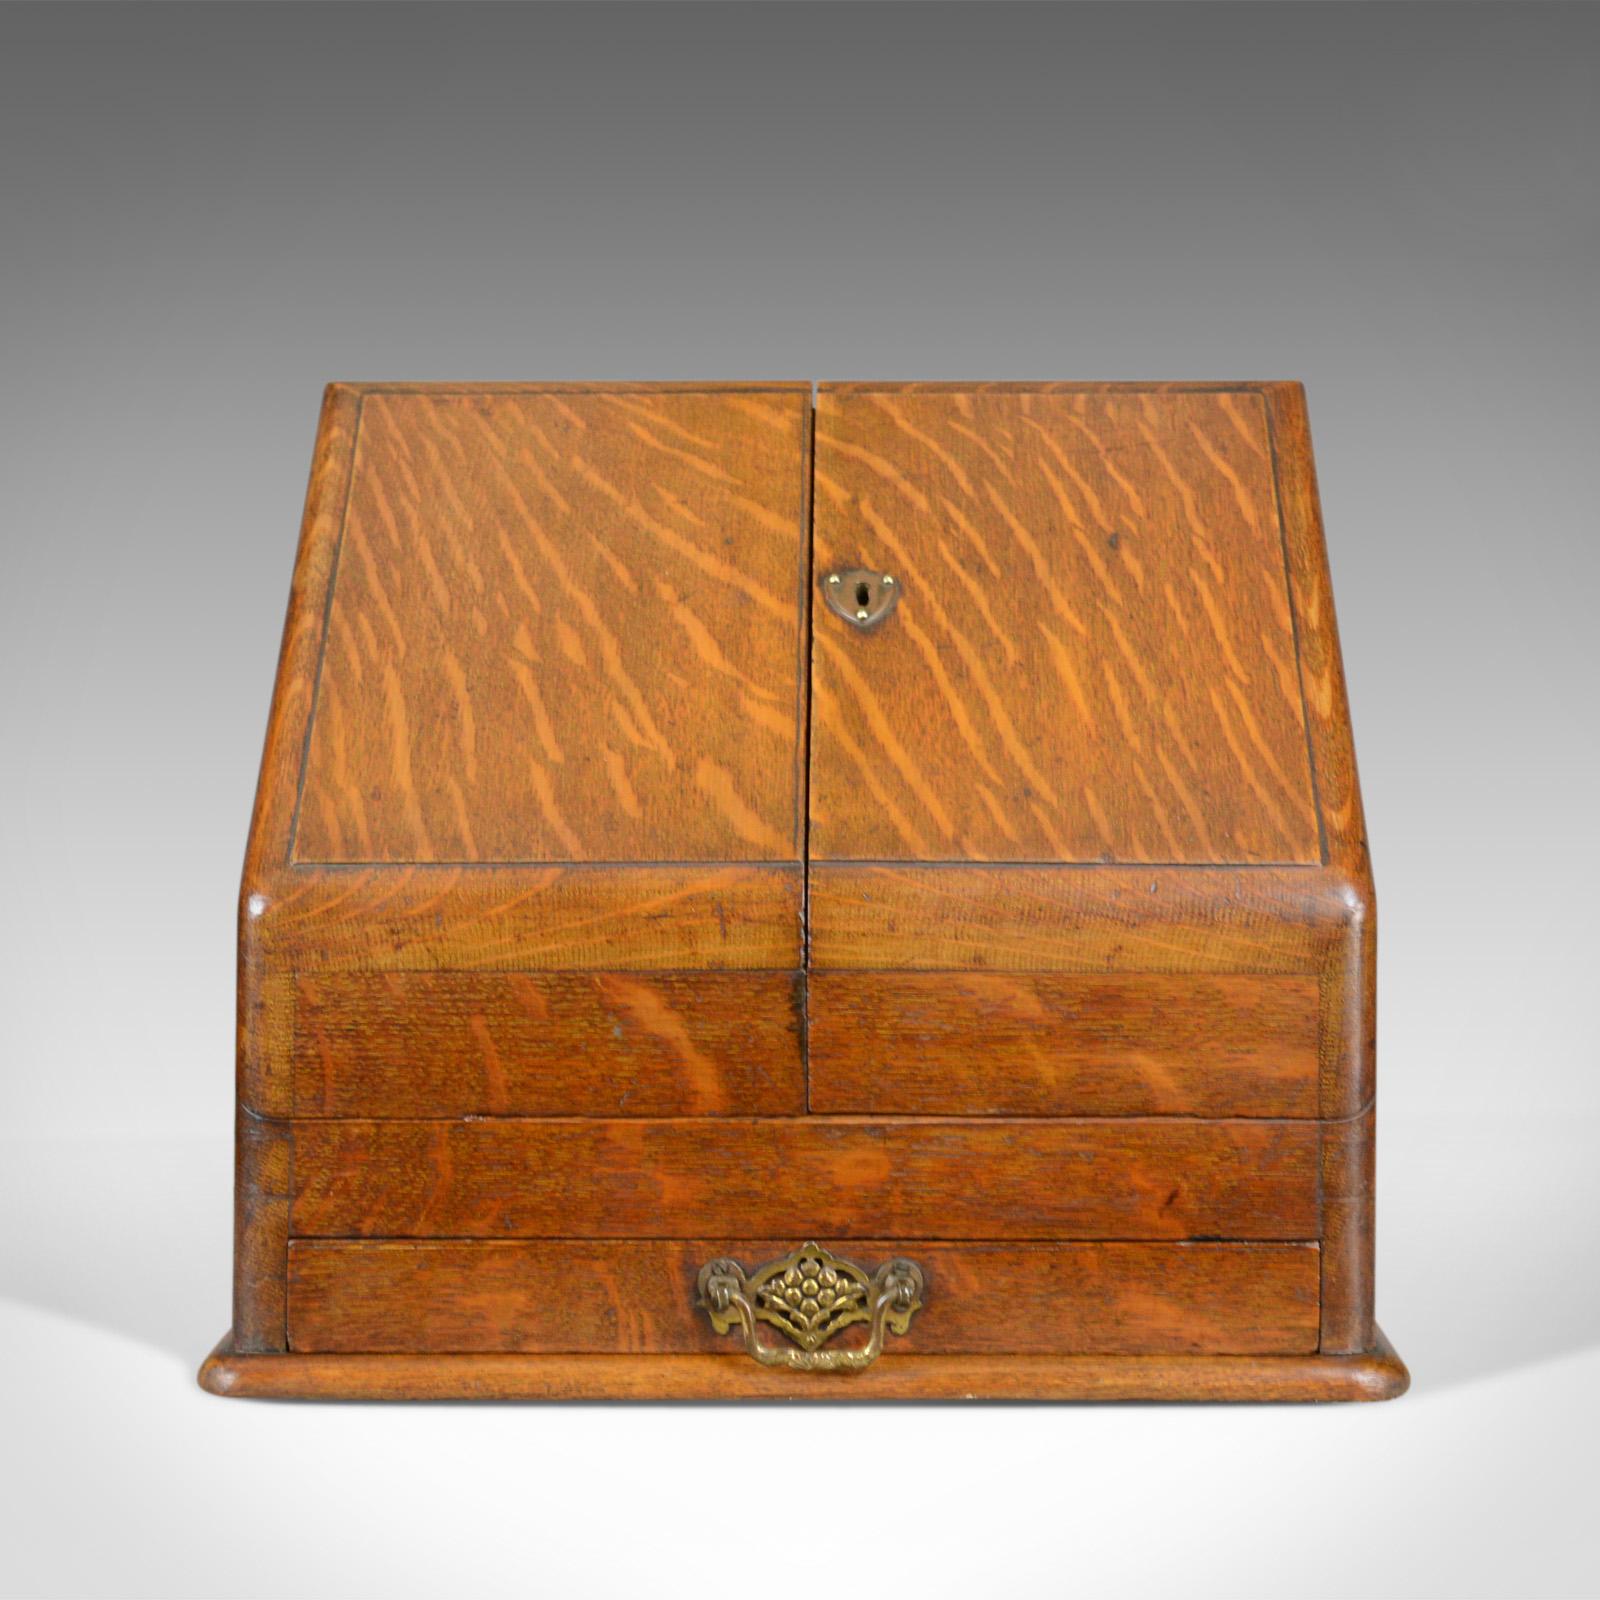 This is an antique stationery cabinet, an English, Victorian, oak correspondence chest dating to the turn of the last century, circa 1900.

Attractive medullary rays in the grain detail of the oak
Good consistent colour in a wax polished